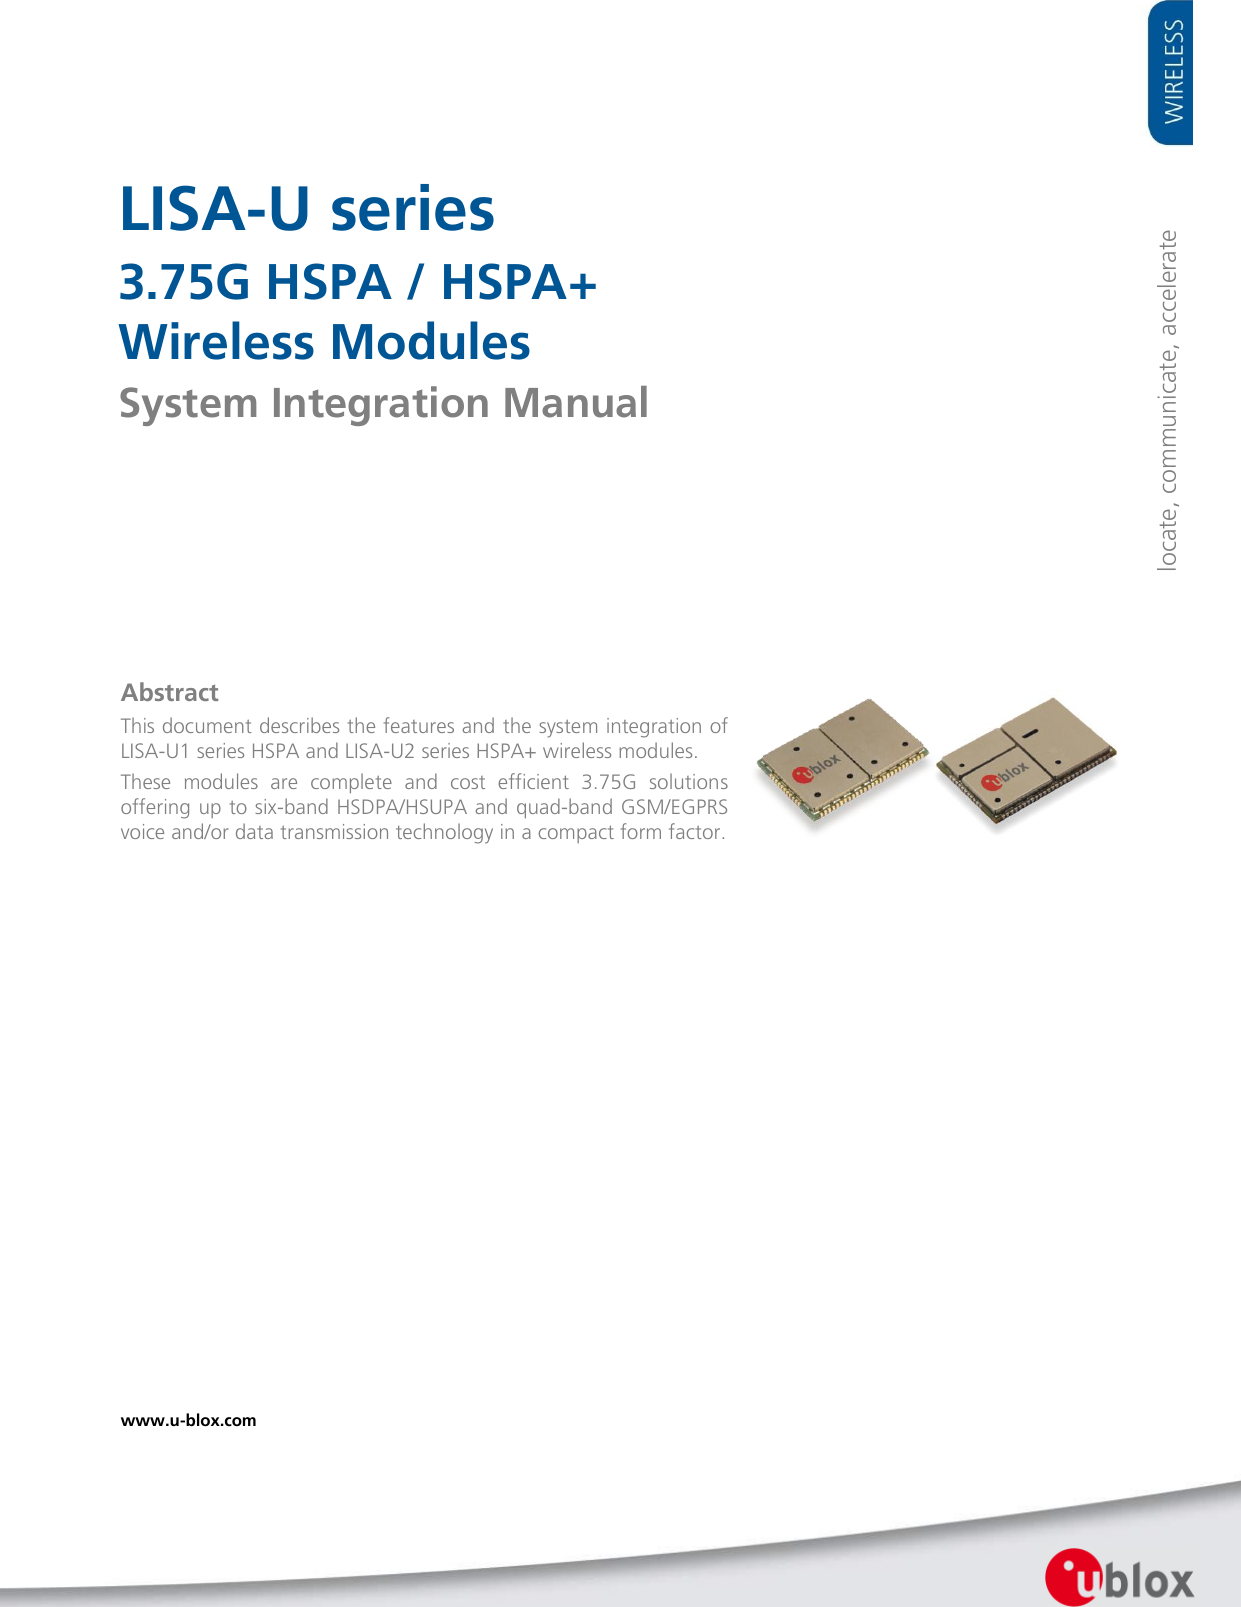     LISA-U series 3.75G HSPA / HSPA+ Wireless Modules System Integration Manual                   Abstract This document describes the features and the system integration of LISA-U1 series HSPA and LISA-U2 series HSPA+ wireless modules. These  modules  are  complete  and  cost  efficient  3.75G  solutions offering up to six-band HSDPA/HSUPA and quad-band GSM/EGPRS voice and/or data transmission technology in a compact form factor.  www.u-blox.com   locate, communicate, accelerate 